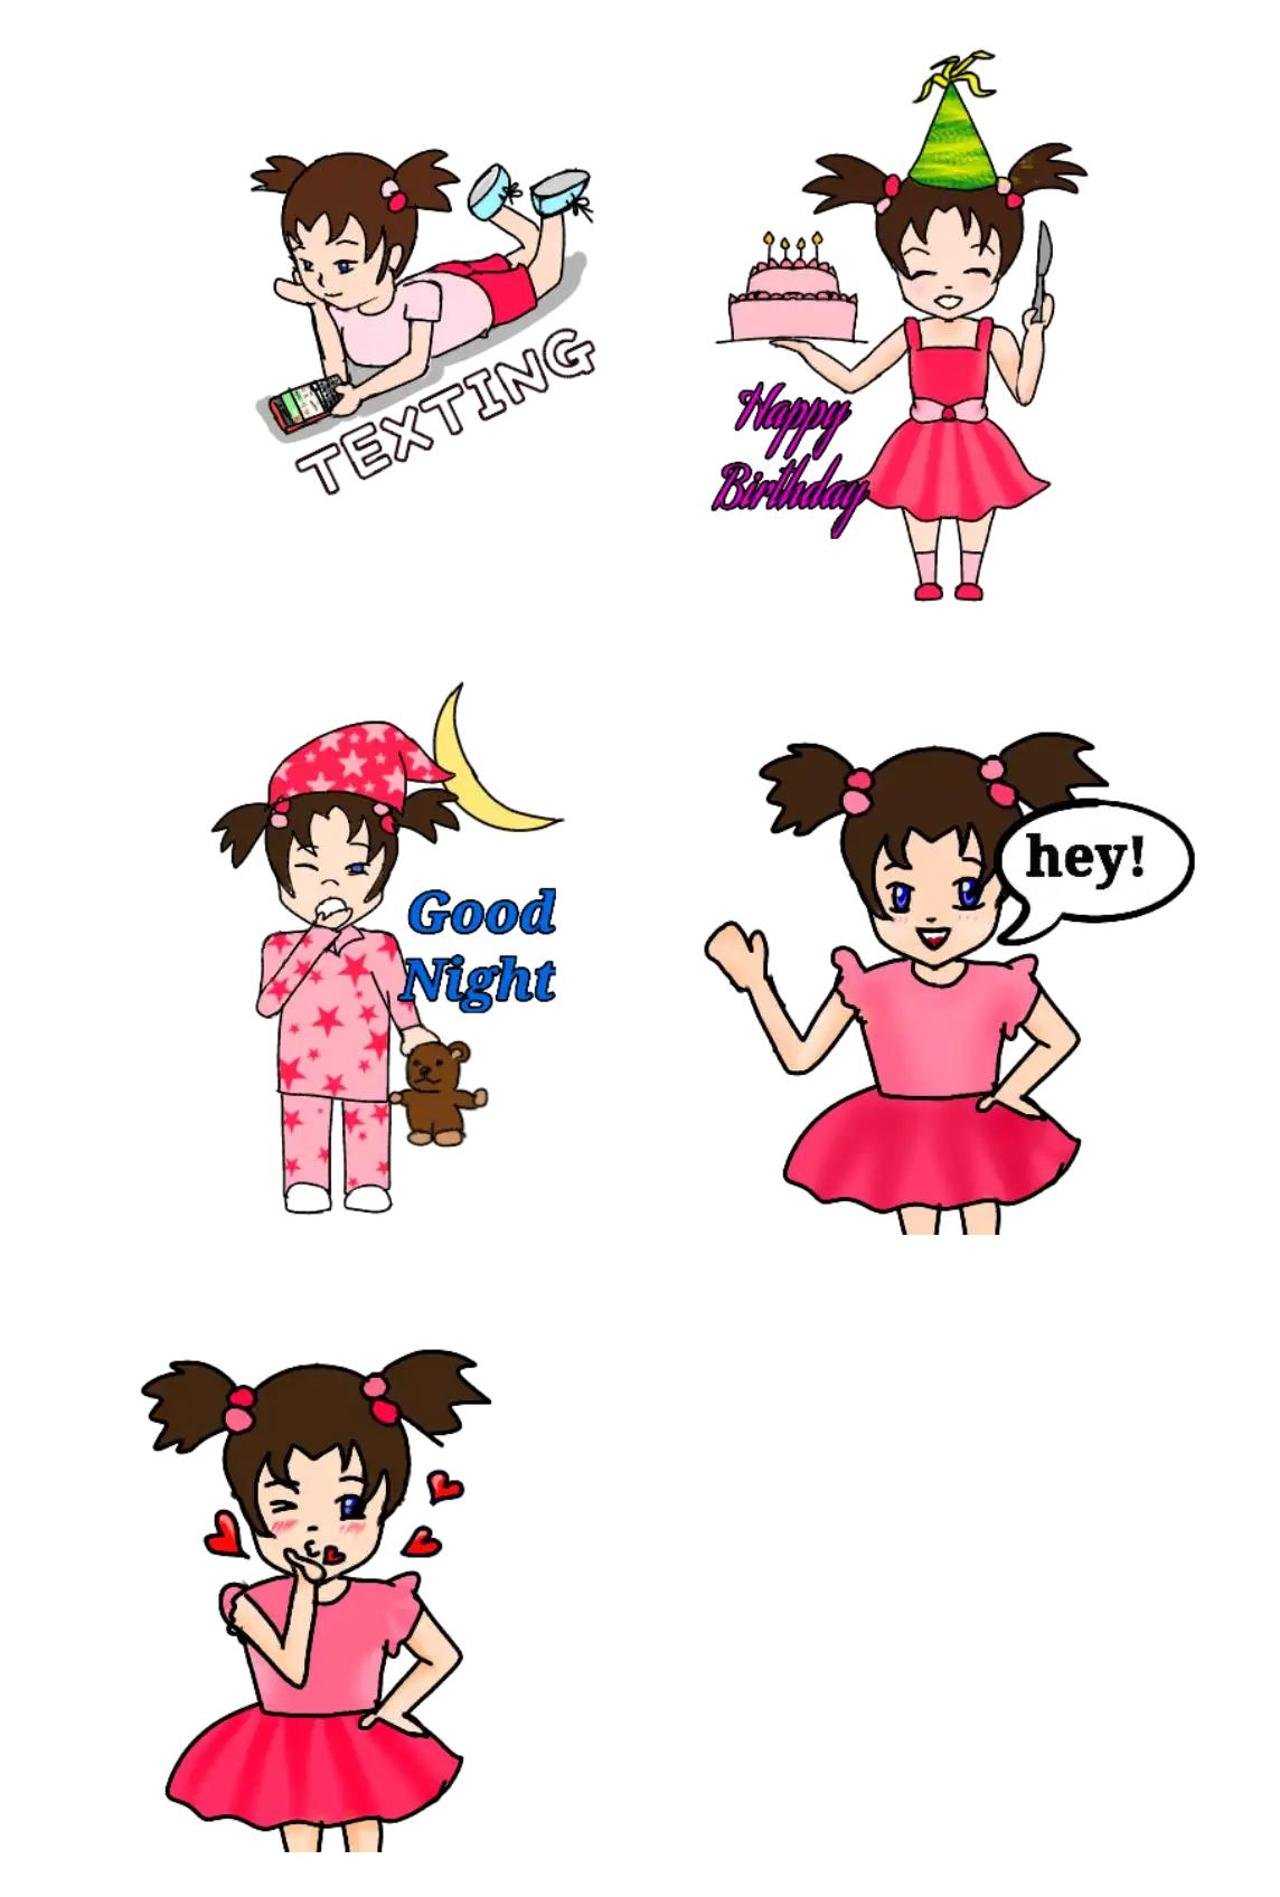 Chibi baka 1 (improved) Animation/Cartoon,People sticker pack for Whatsapp, Telegram, Signal, and others chatting and message apps